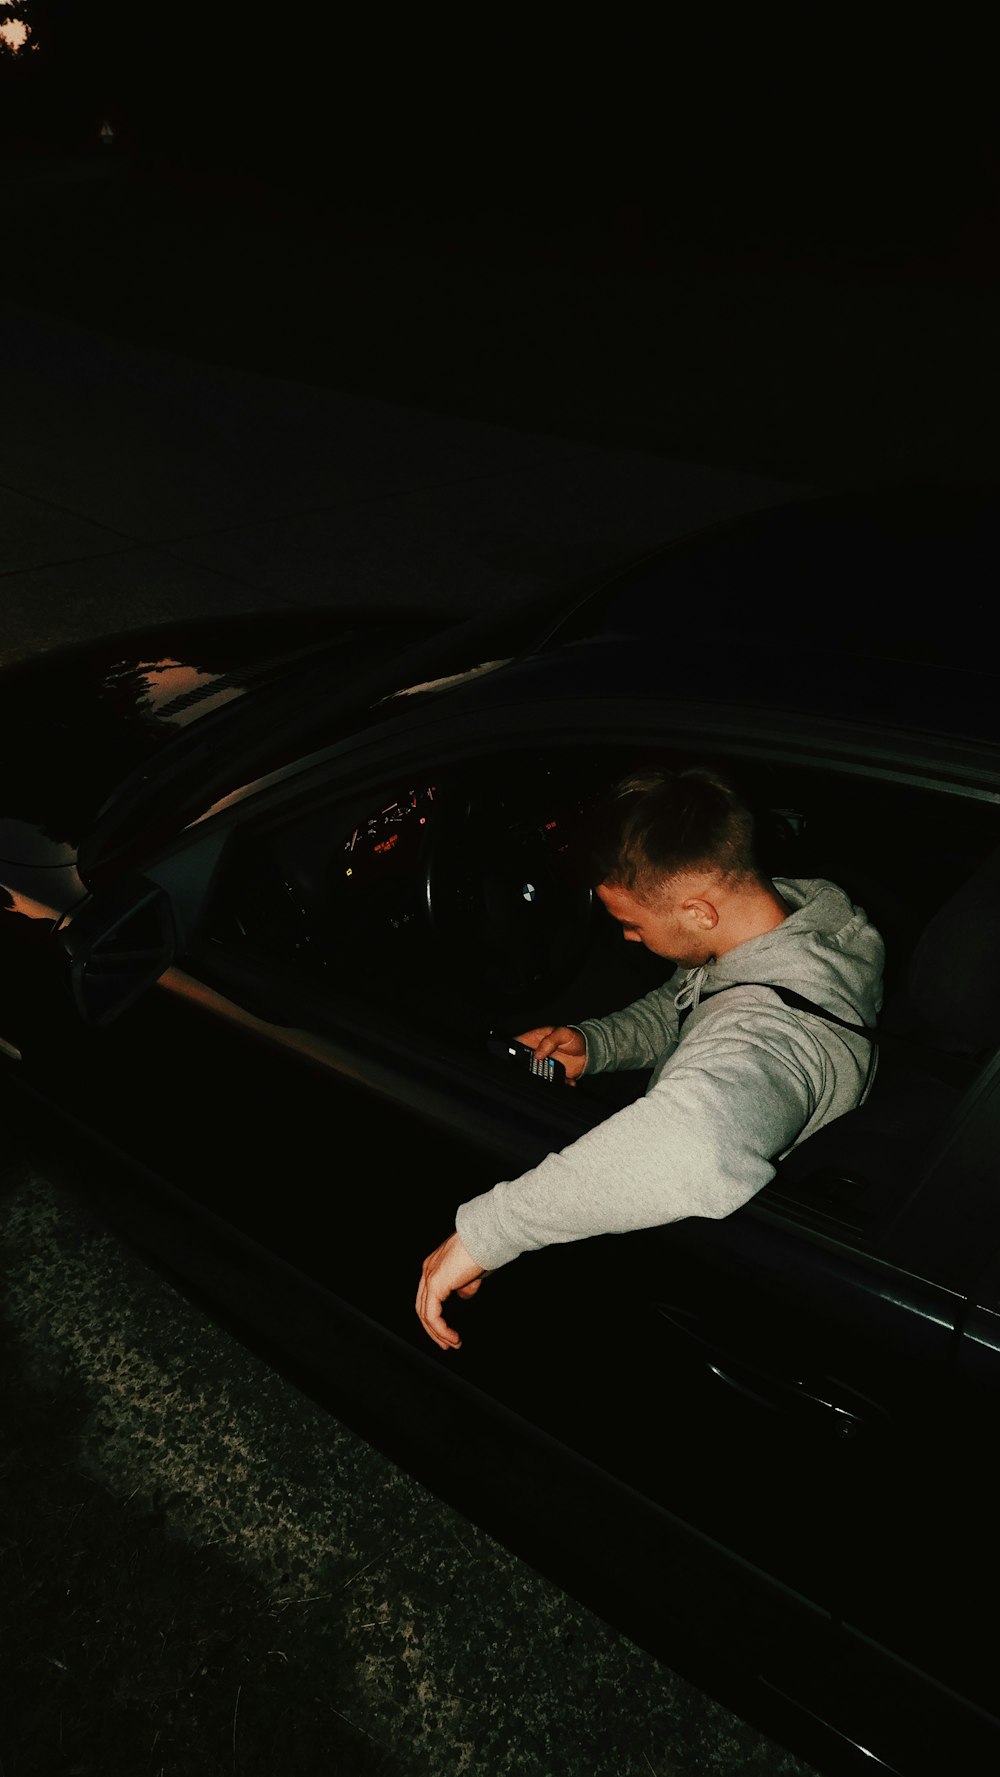 a man leaning out of a car window at night